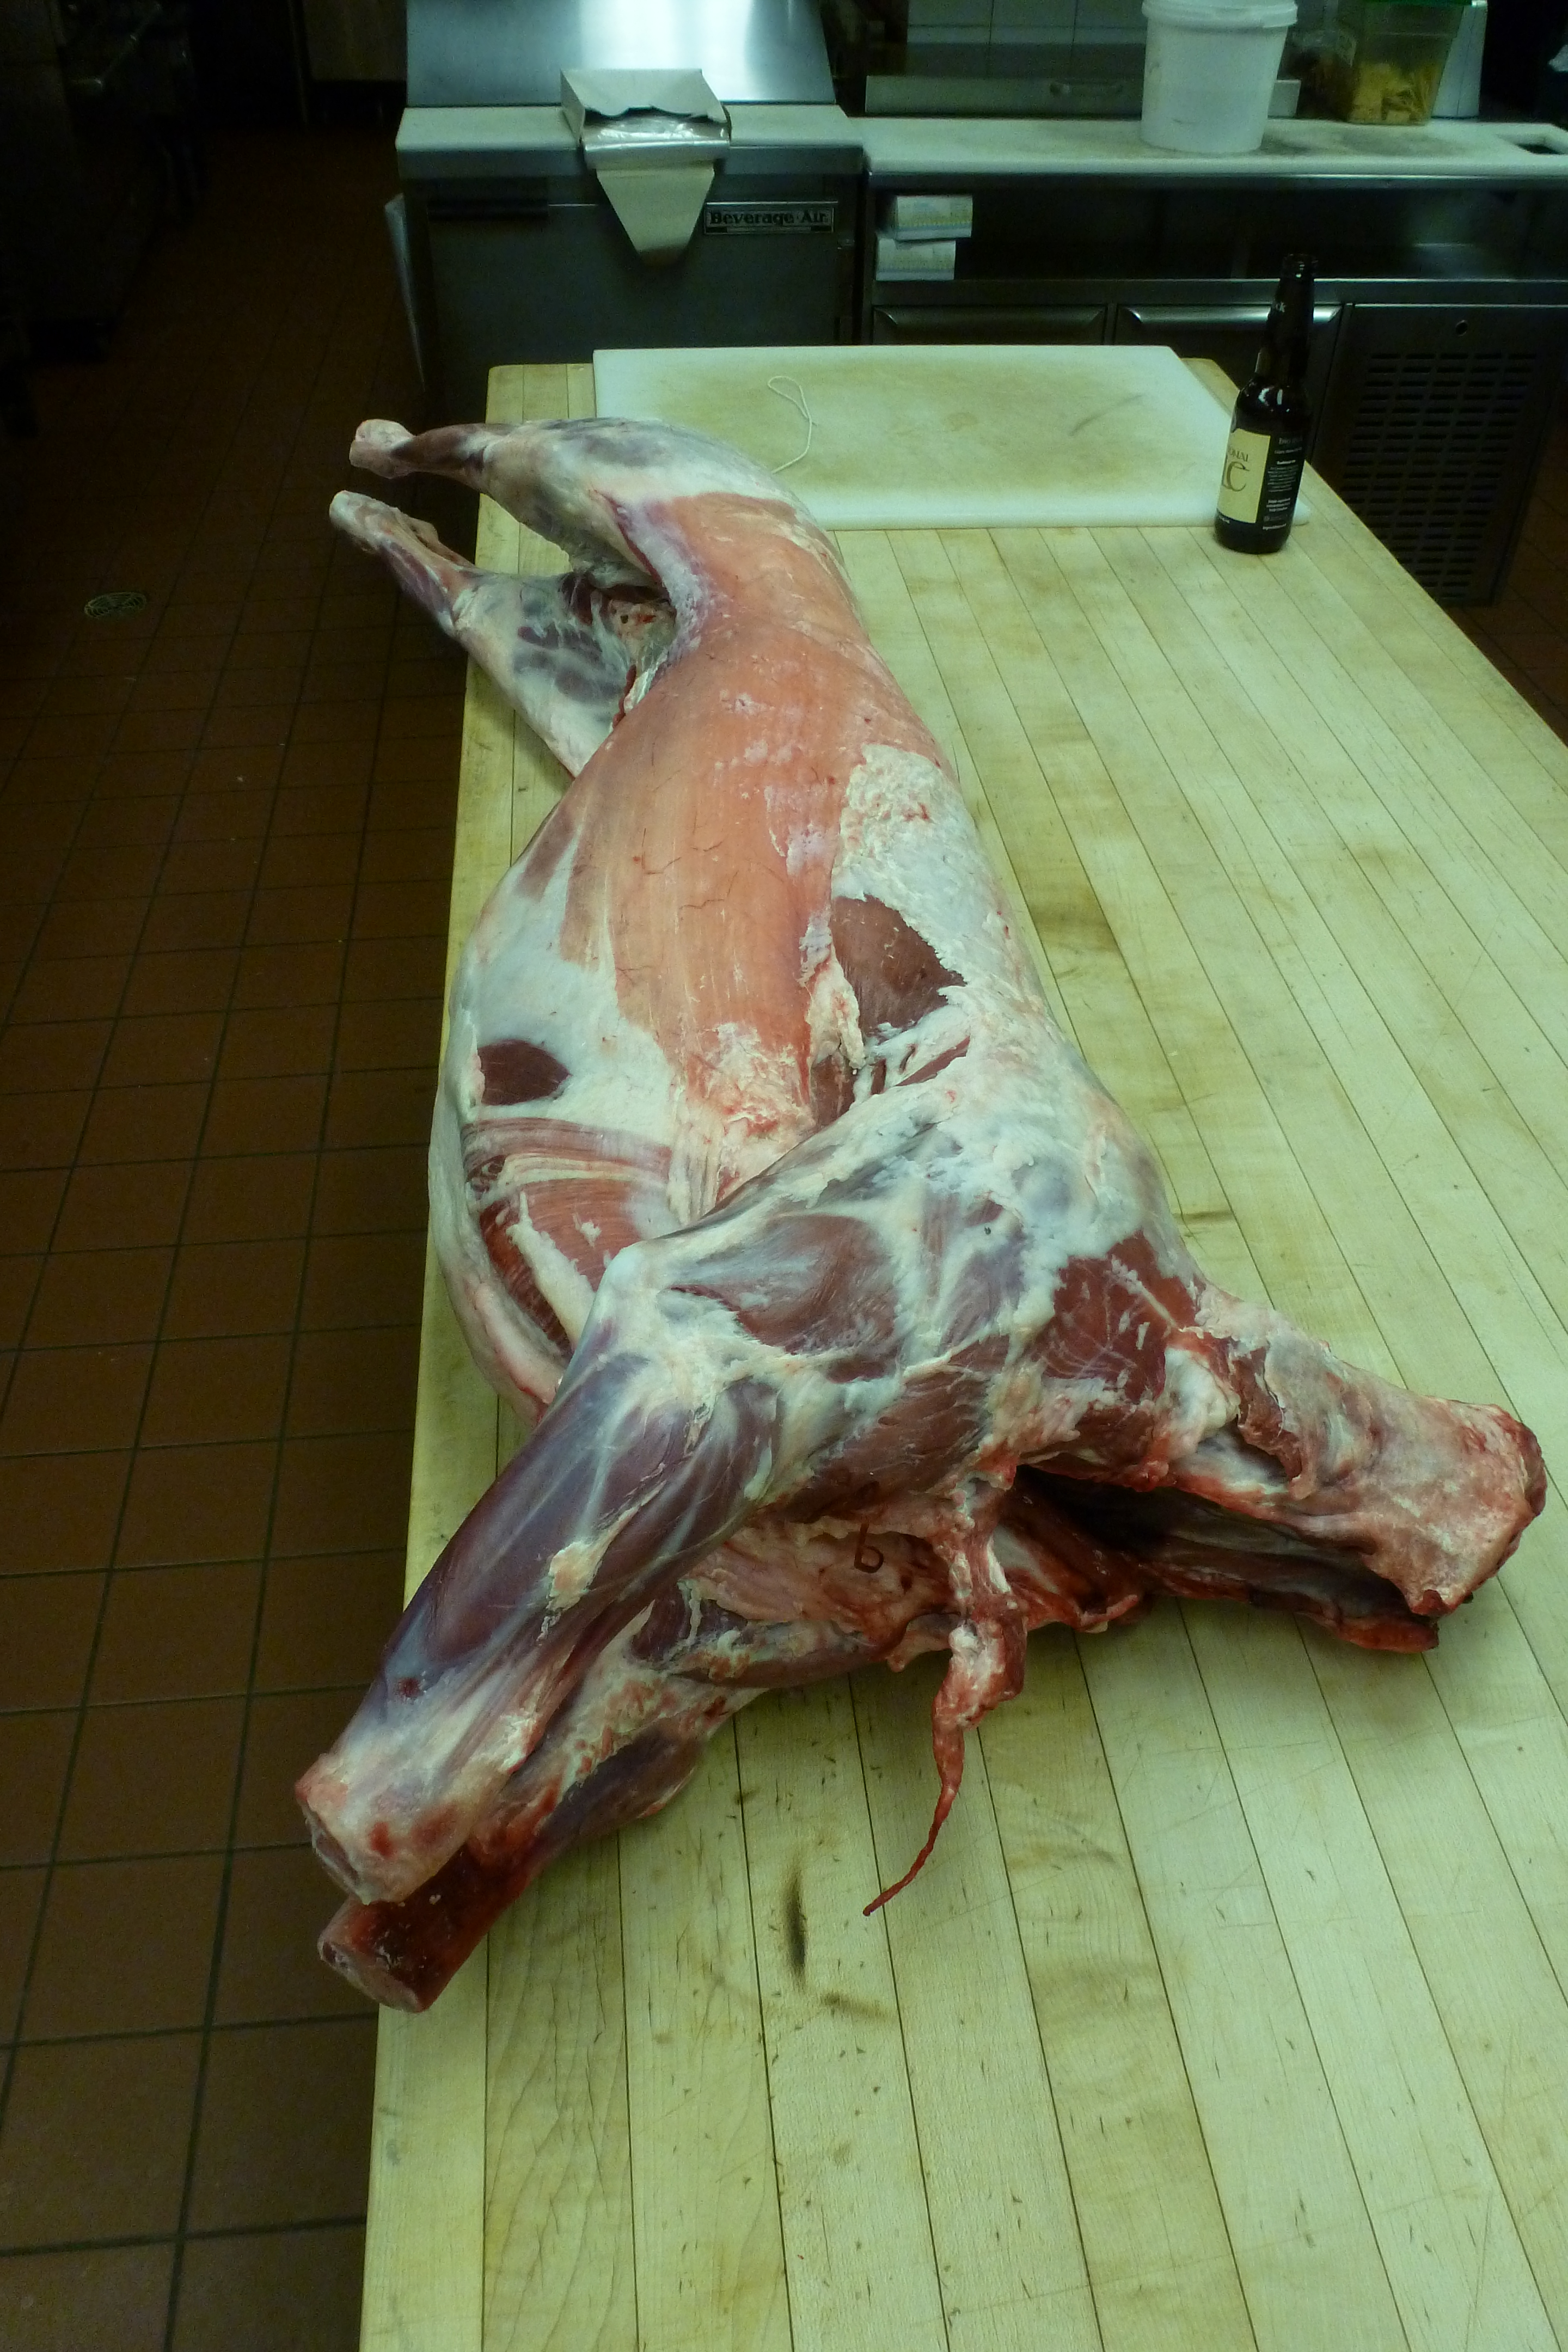 A whole lamb carcass, ready for cutting